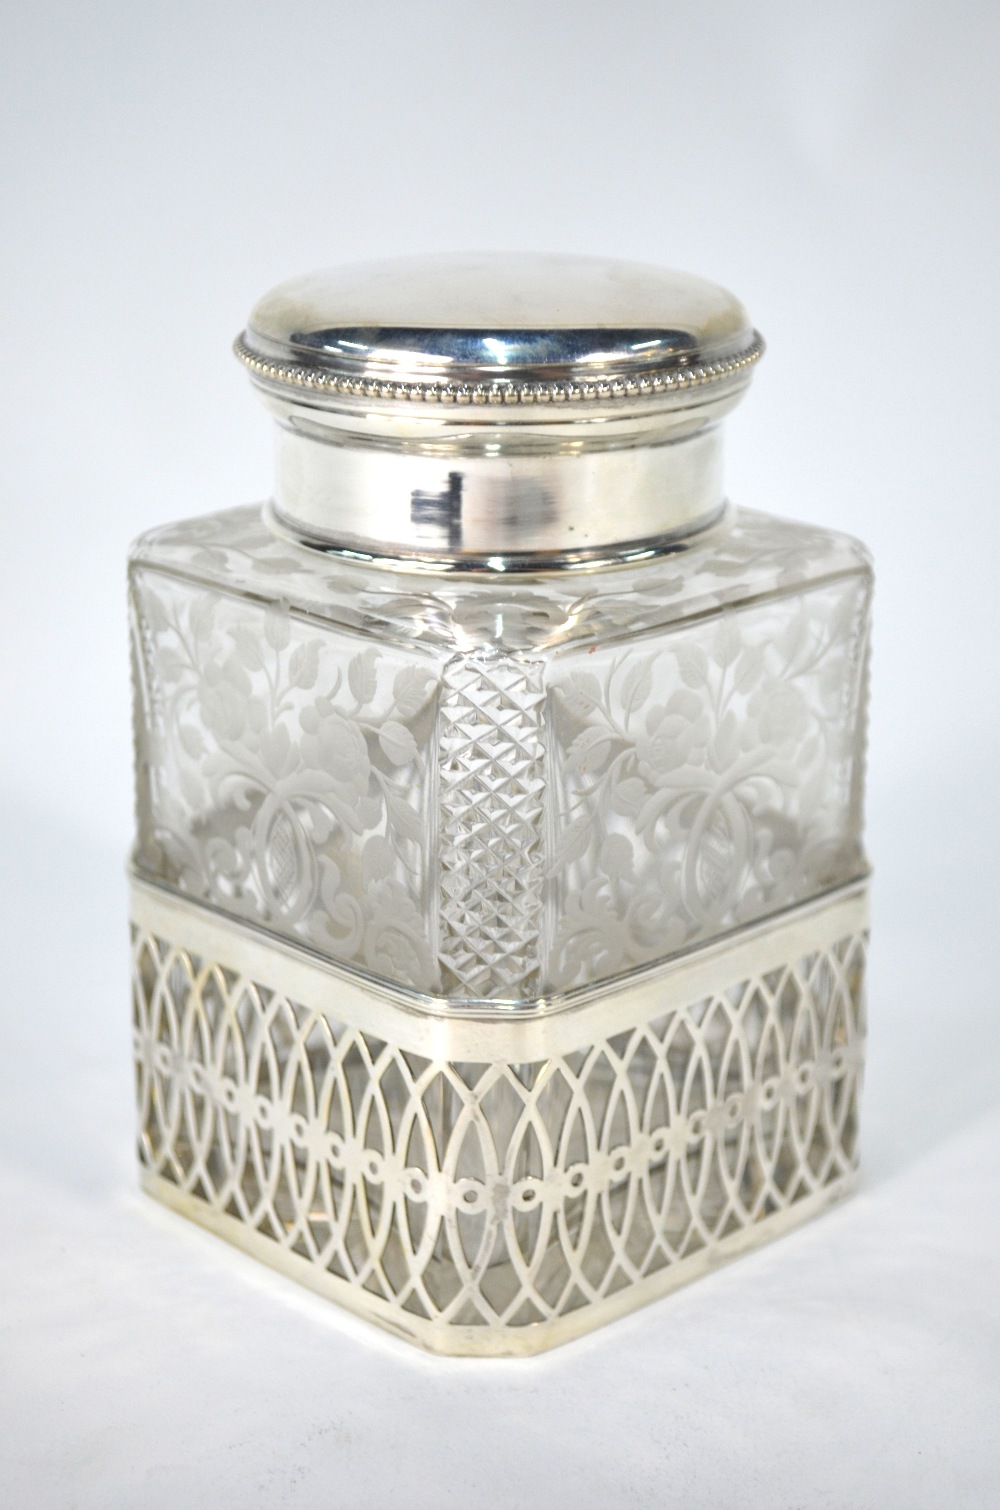 A German square-cut glass tea caddy and stopper with strawberry-cut canted corners and wheel-etched